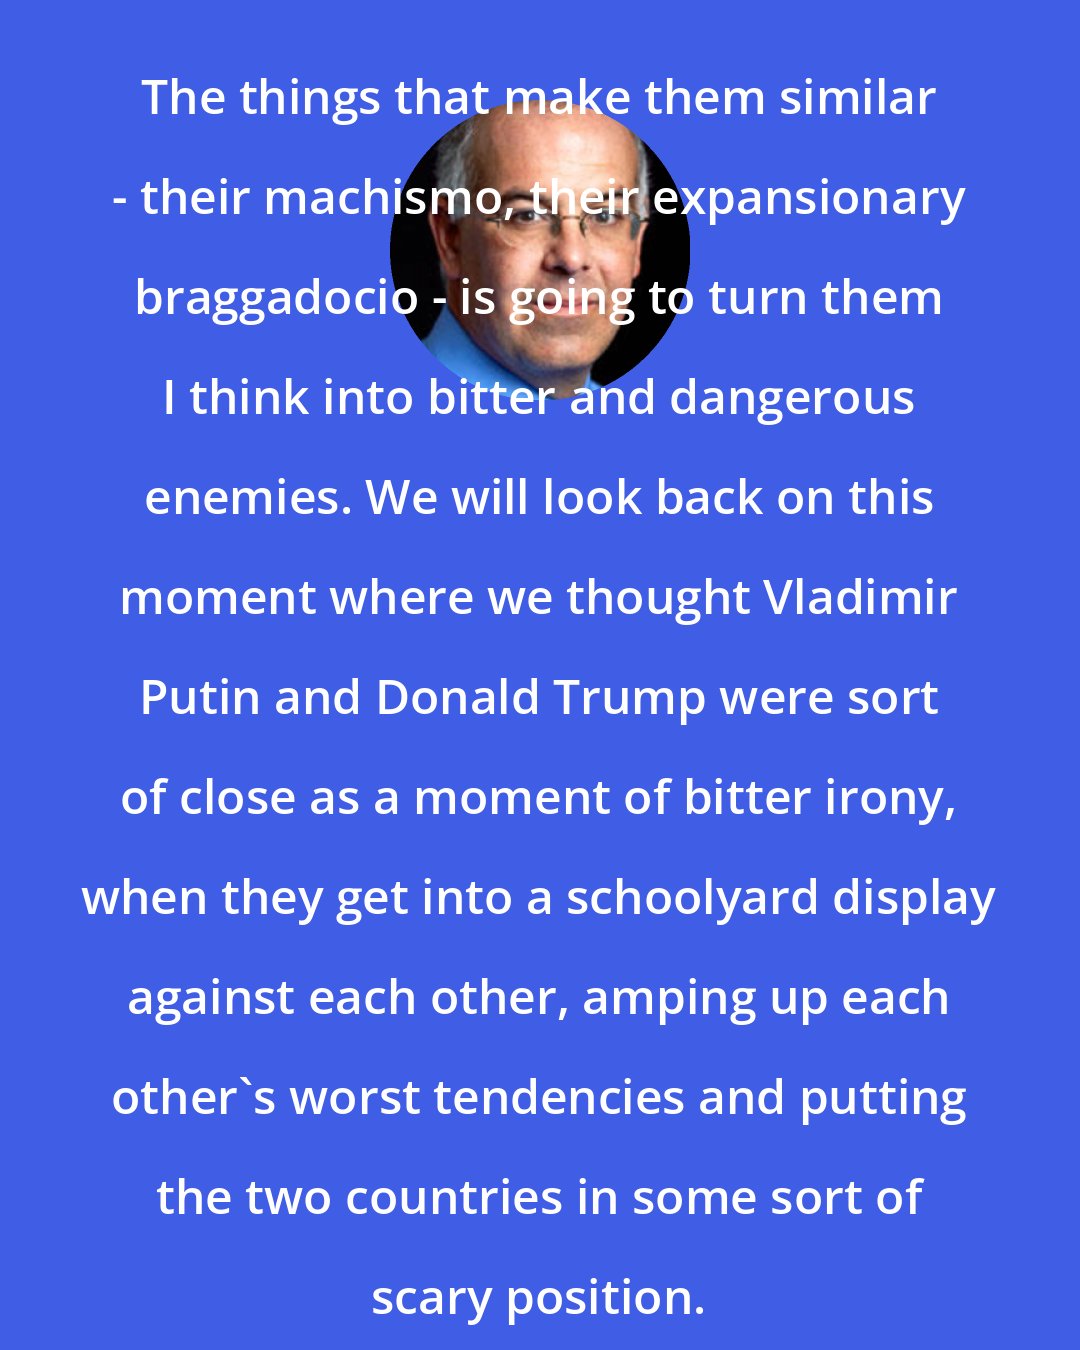 David Brooks: The things that make them similar - their machismo, their expansionary braggadocio - is going to turn them I think into bitter and dangerous enemies. We will look back on this moment where we thought Vladimir Putin and Donald Trump were sort of close as a moment of bitter irony, when they get into a schoolyard display against each other, amping up each other's worst tendencies and putting the two countries in some sort of scary position.